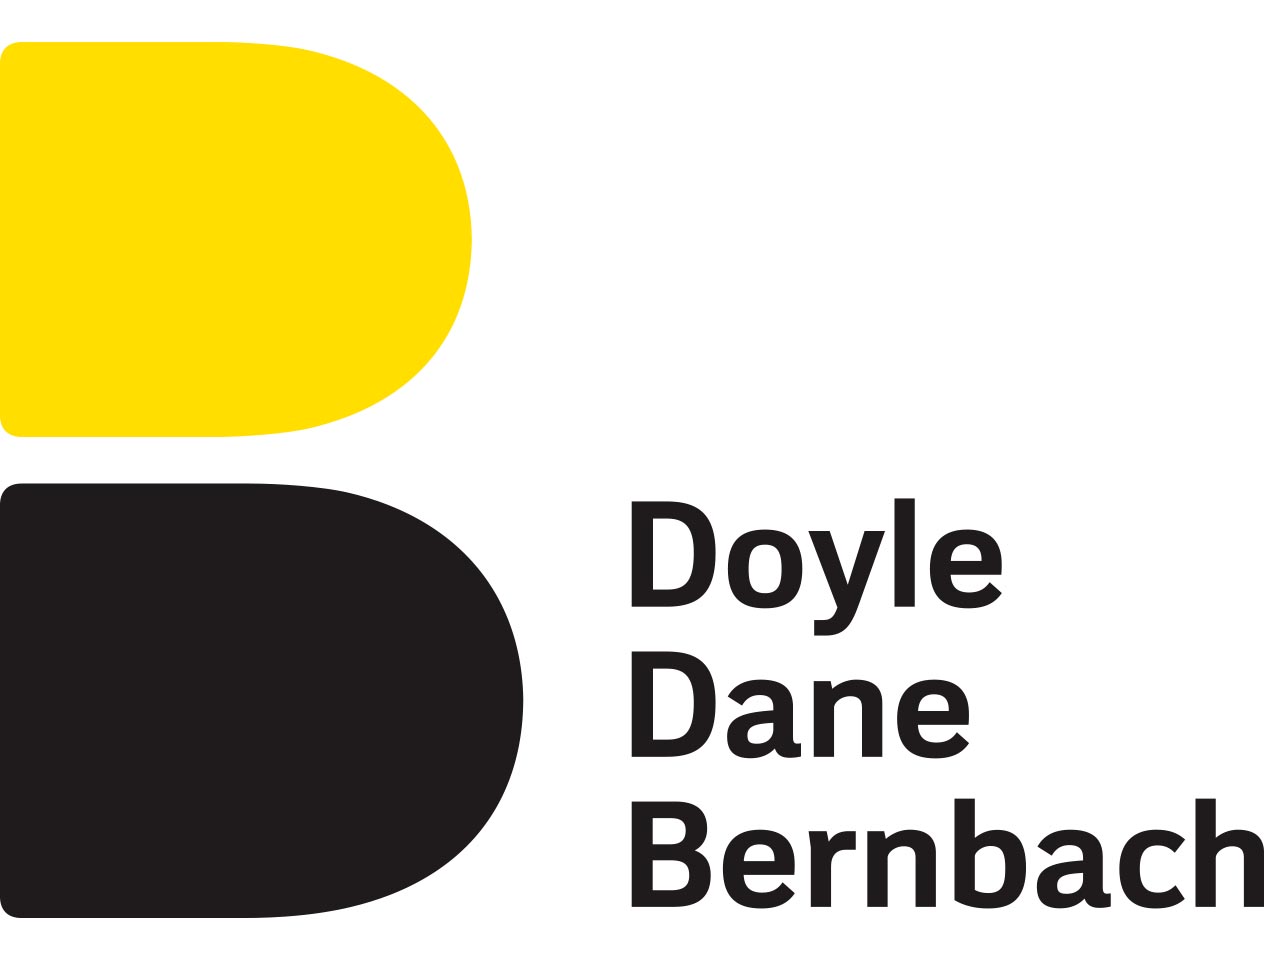 DDB Dubai integrates its operations with other Omnicom Group companies